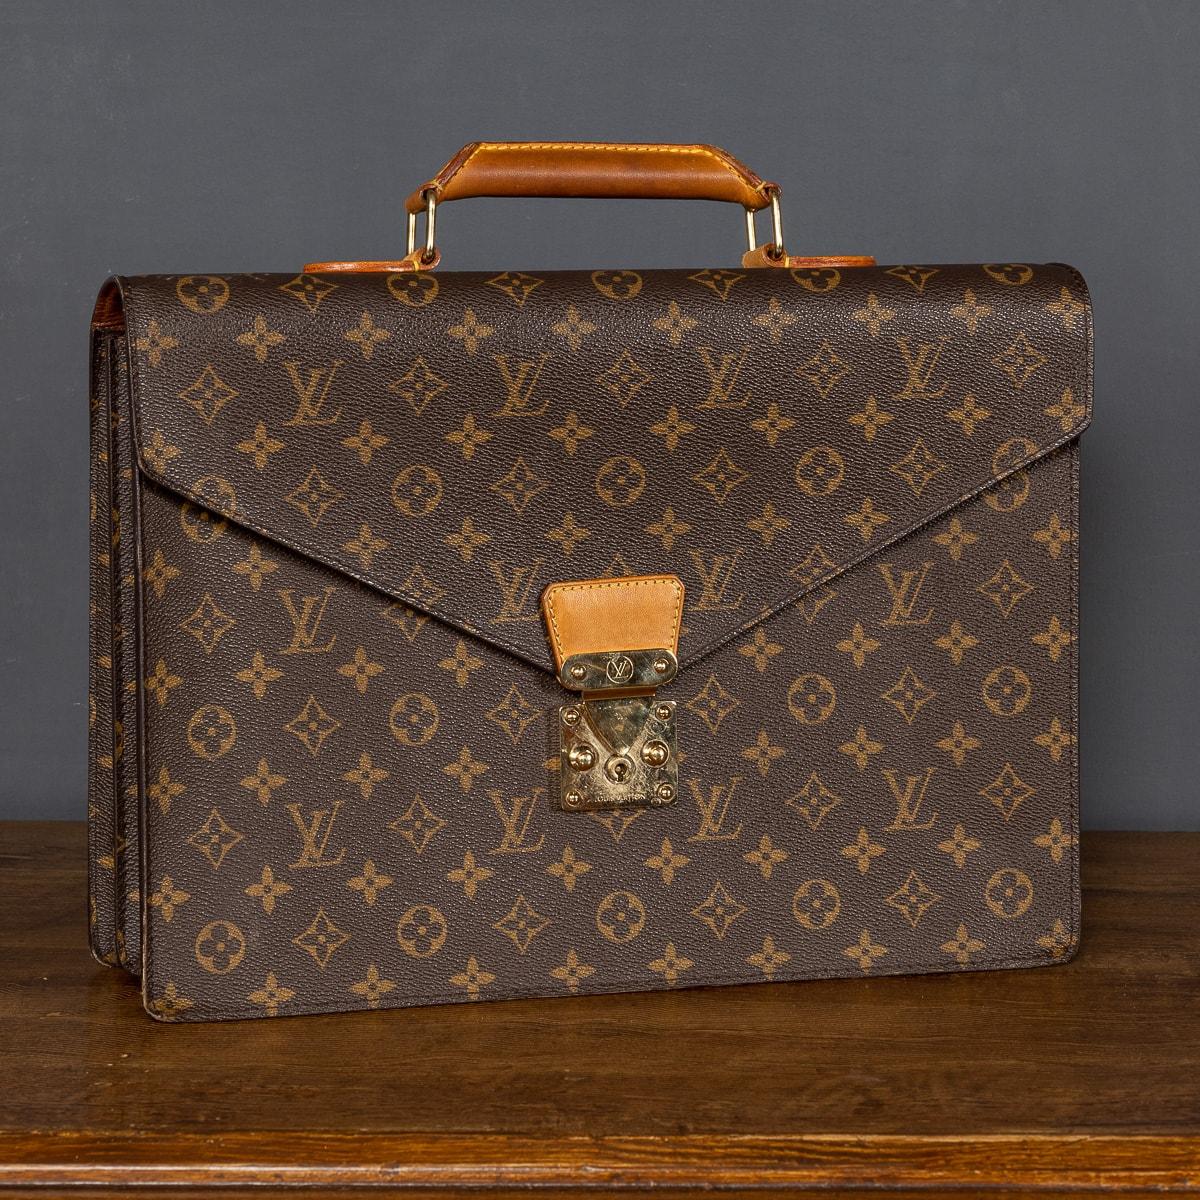 A beautiful Louis Vuitton soft sided briefcase, the exterior finished in the iconic monogram canvas with brass fittings. This beautiful example of a briefcase comes with a soft leather handle, brassware working as new and the briefcase is in